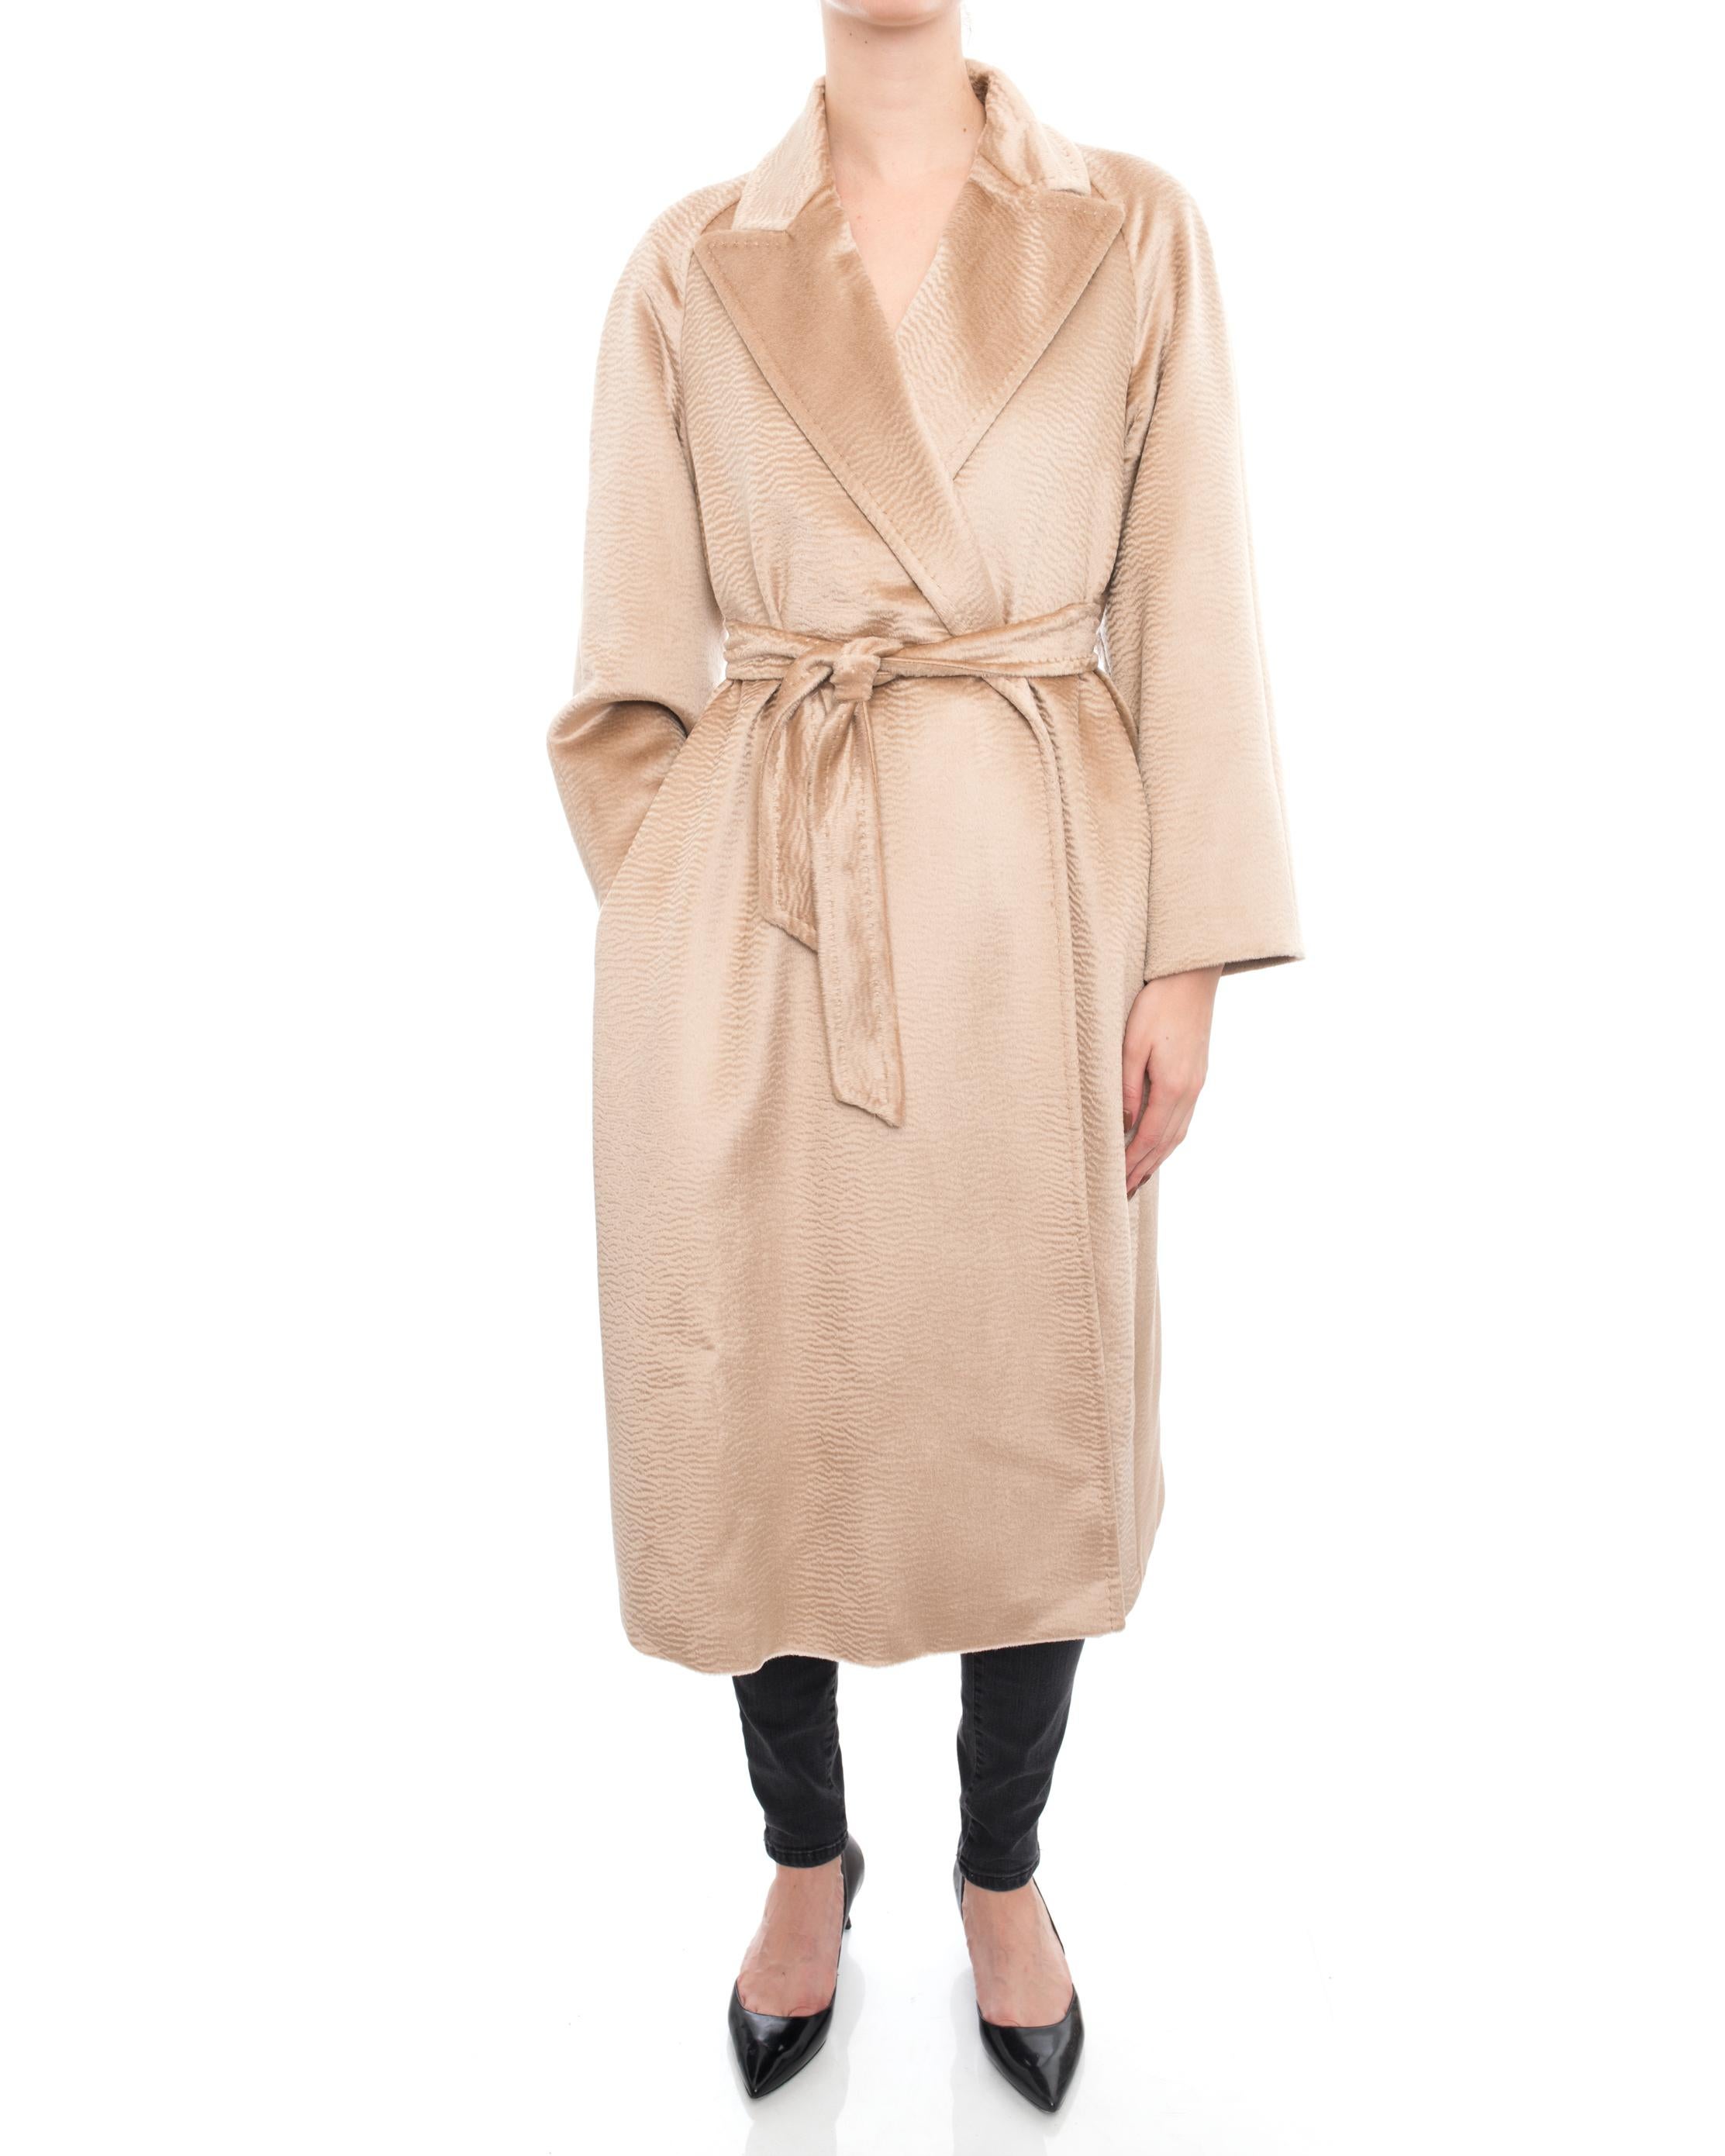 Max Mara Bormio Alpaca Soft Textured Belted Oversized Coat.  Loose fitting design that fastens with sash belt and no other buttons or closures, side hip pockets on seam,  jacquard logo fabric lining.  Marked size USA 2 / FR34 / IT 36. The coat is